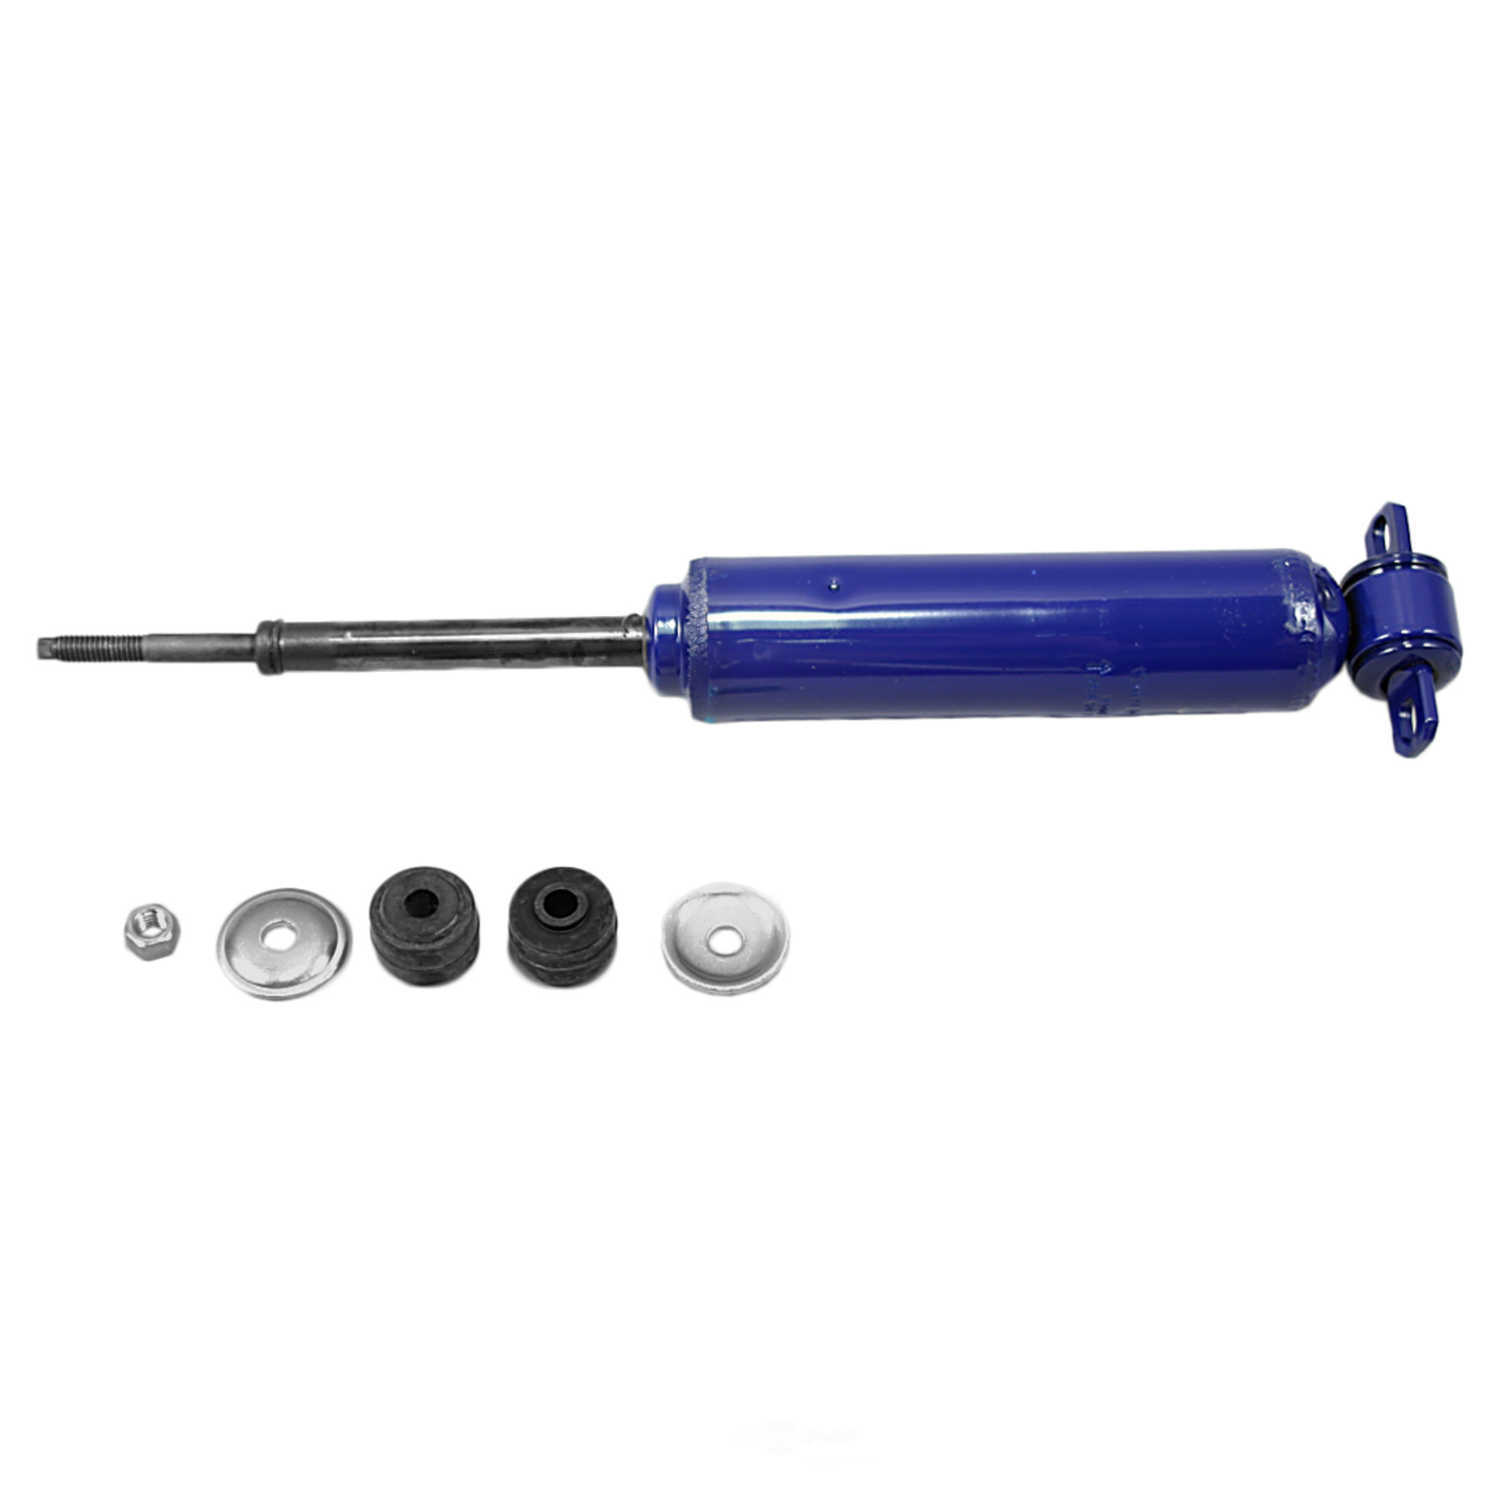 MONROE SHOCKS/STRUTS - Monro-Matic Plus Shock Absorber (With ABS Brakes, Front) - MOE 32224